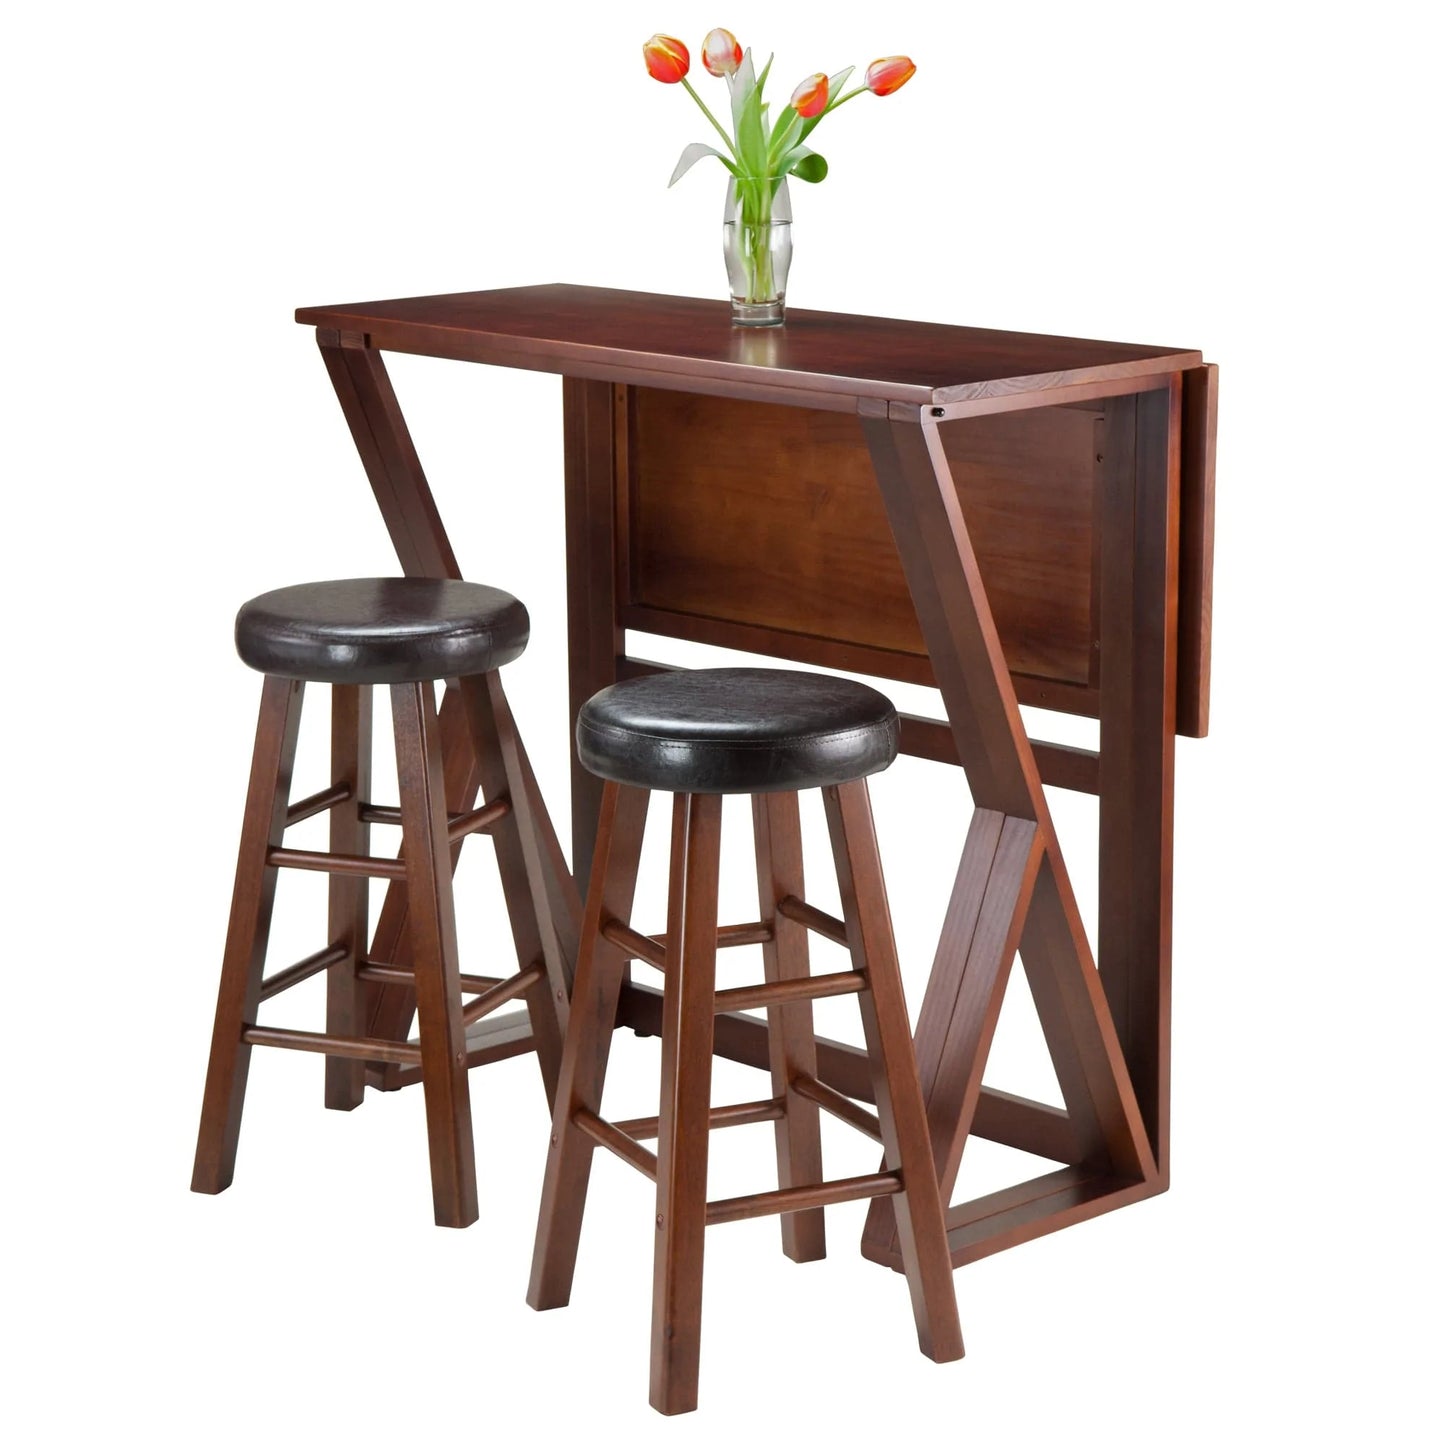 WINSOME Pub Table Set Harrington 3-Pc Drop Leaf High Table with Cushion Seat Counter Stools, Walnut and Espresso